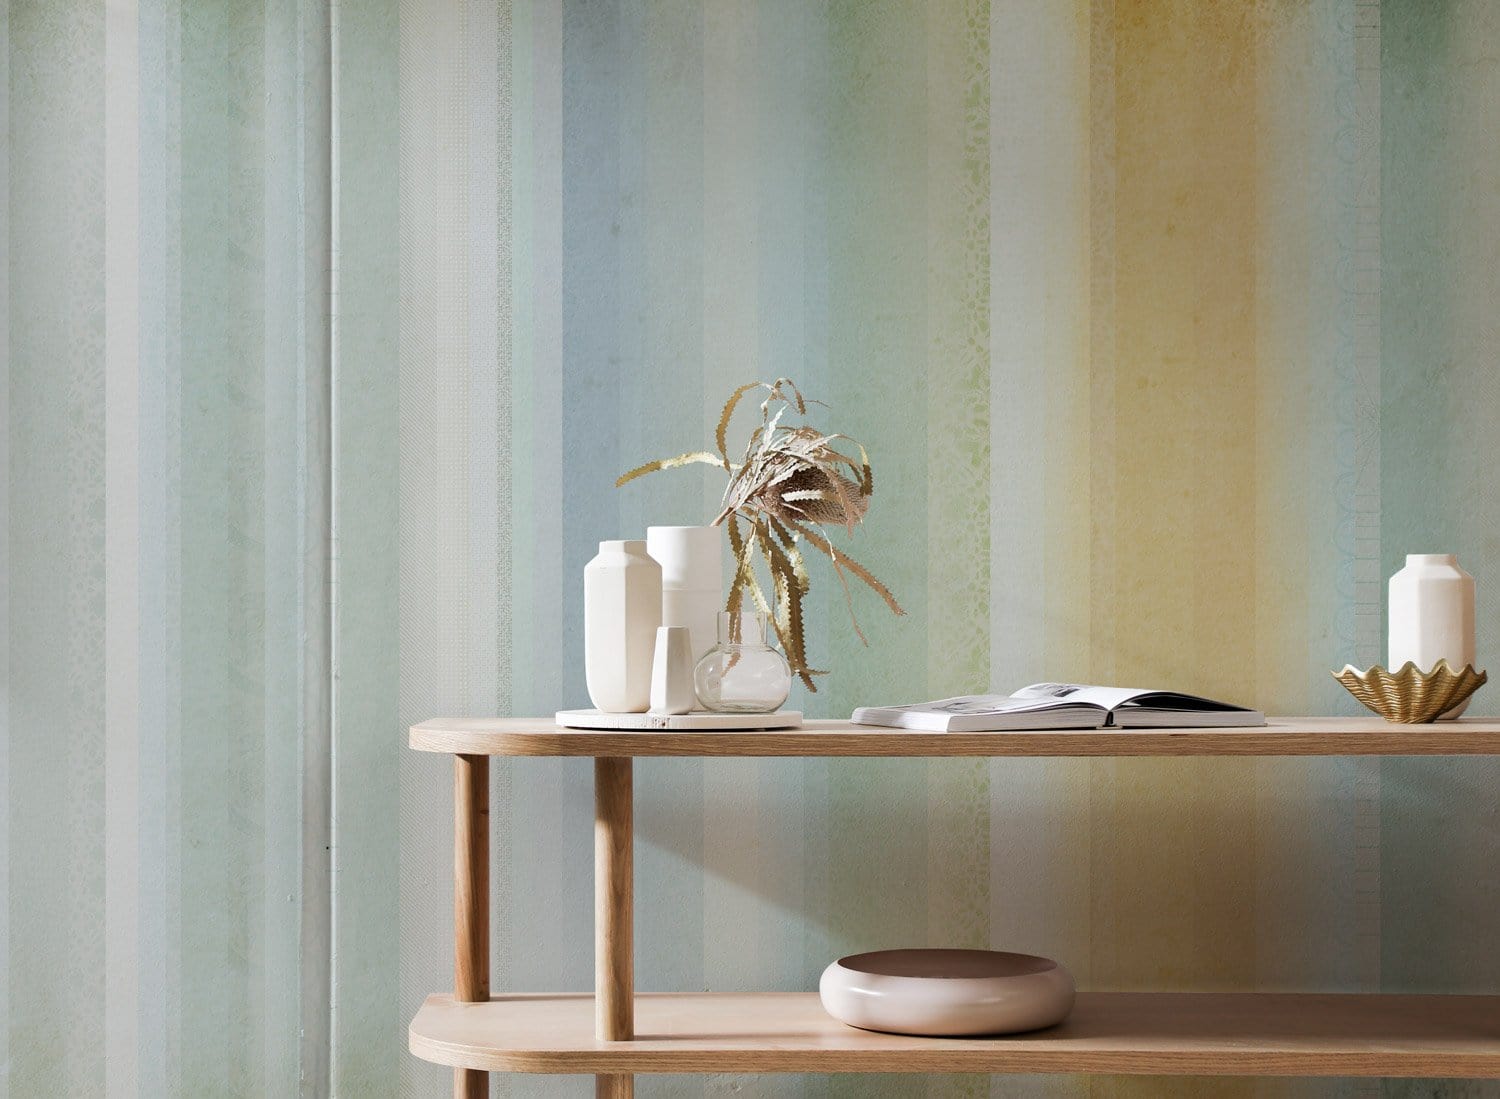 Patterned Color Texture Stripe Wallpaper Mural for the Decoration of the Study Room